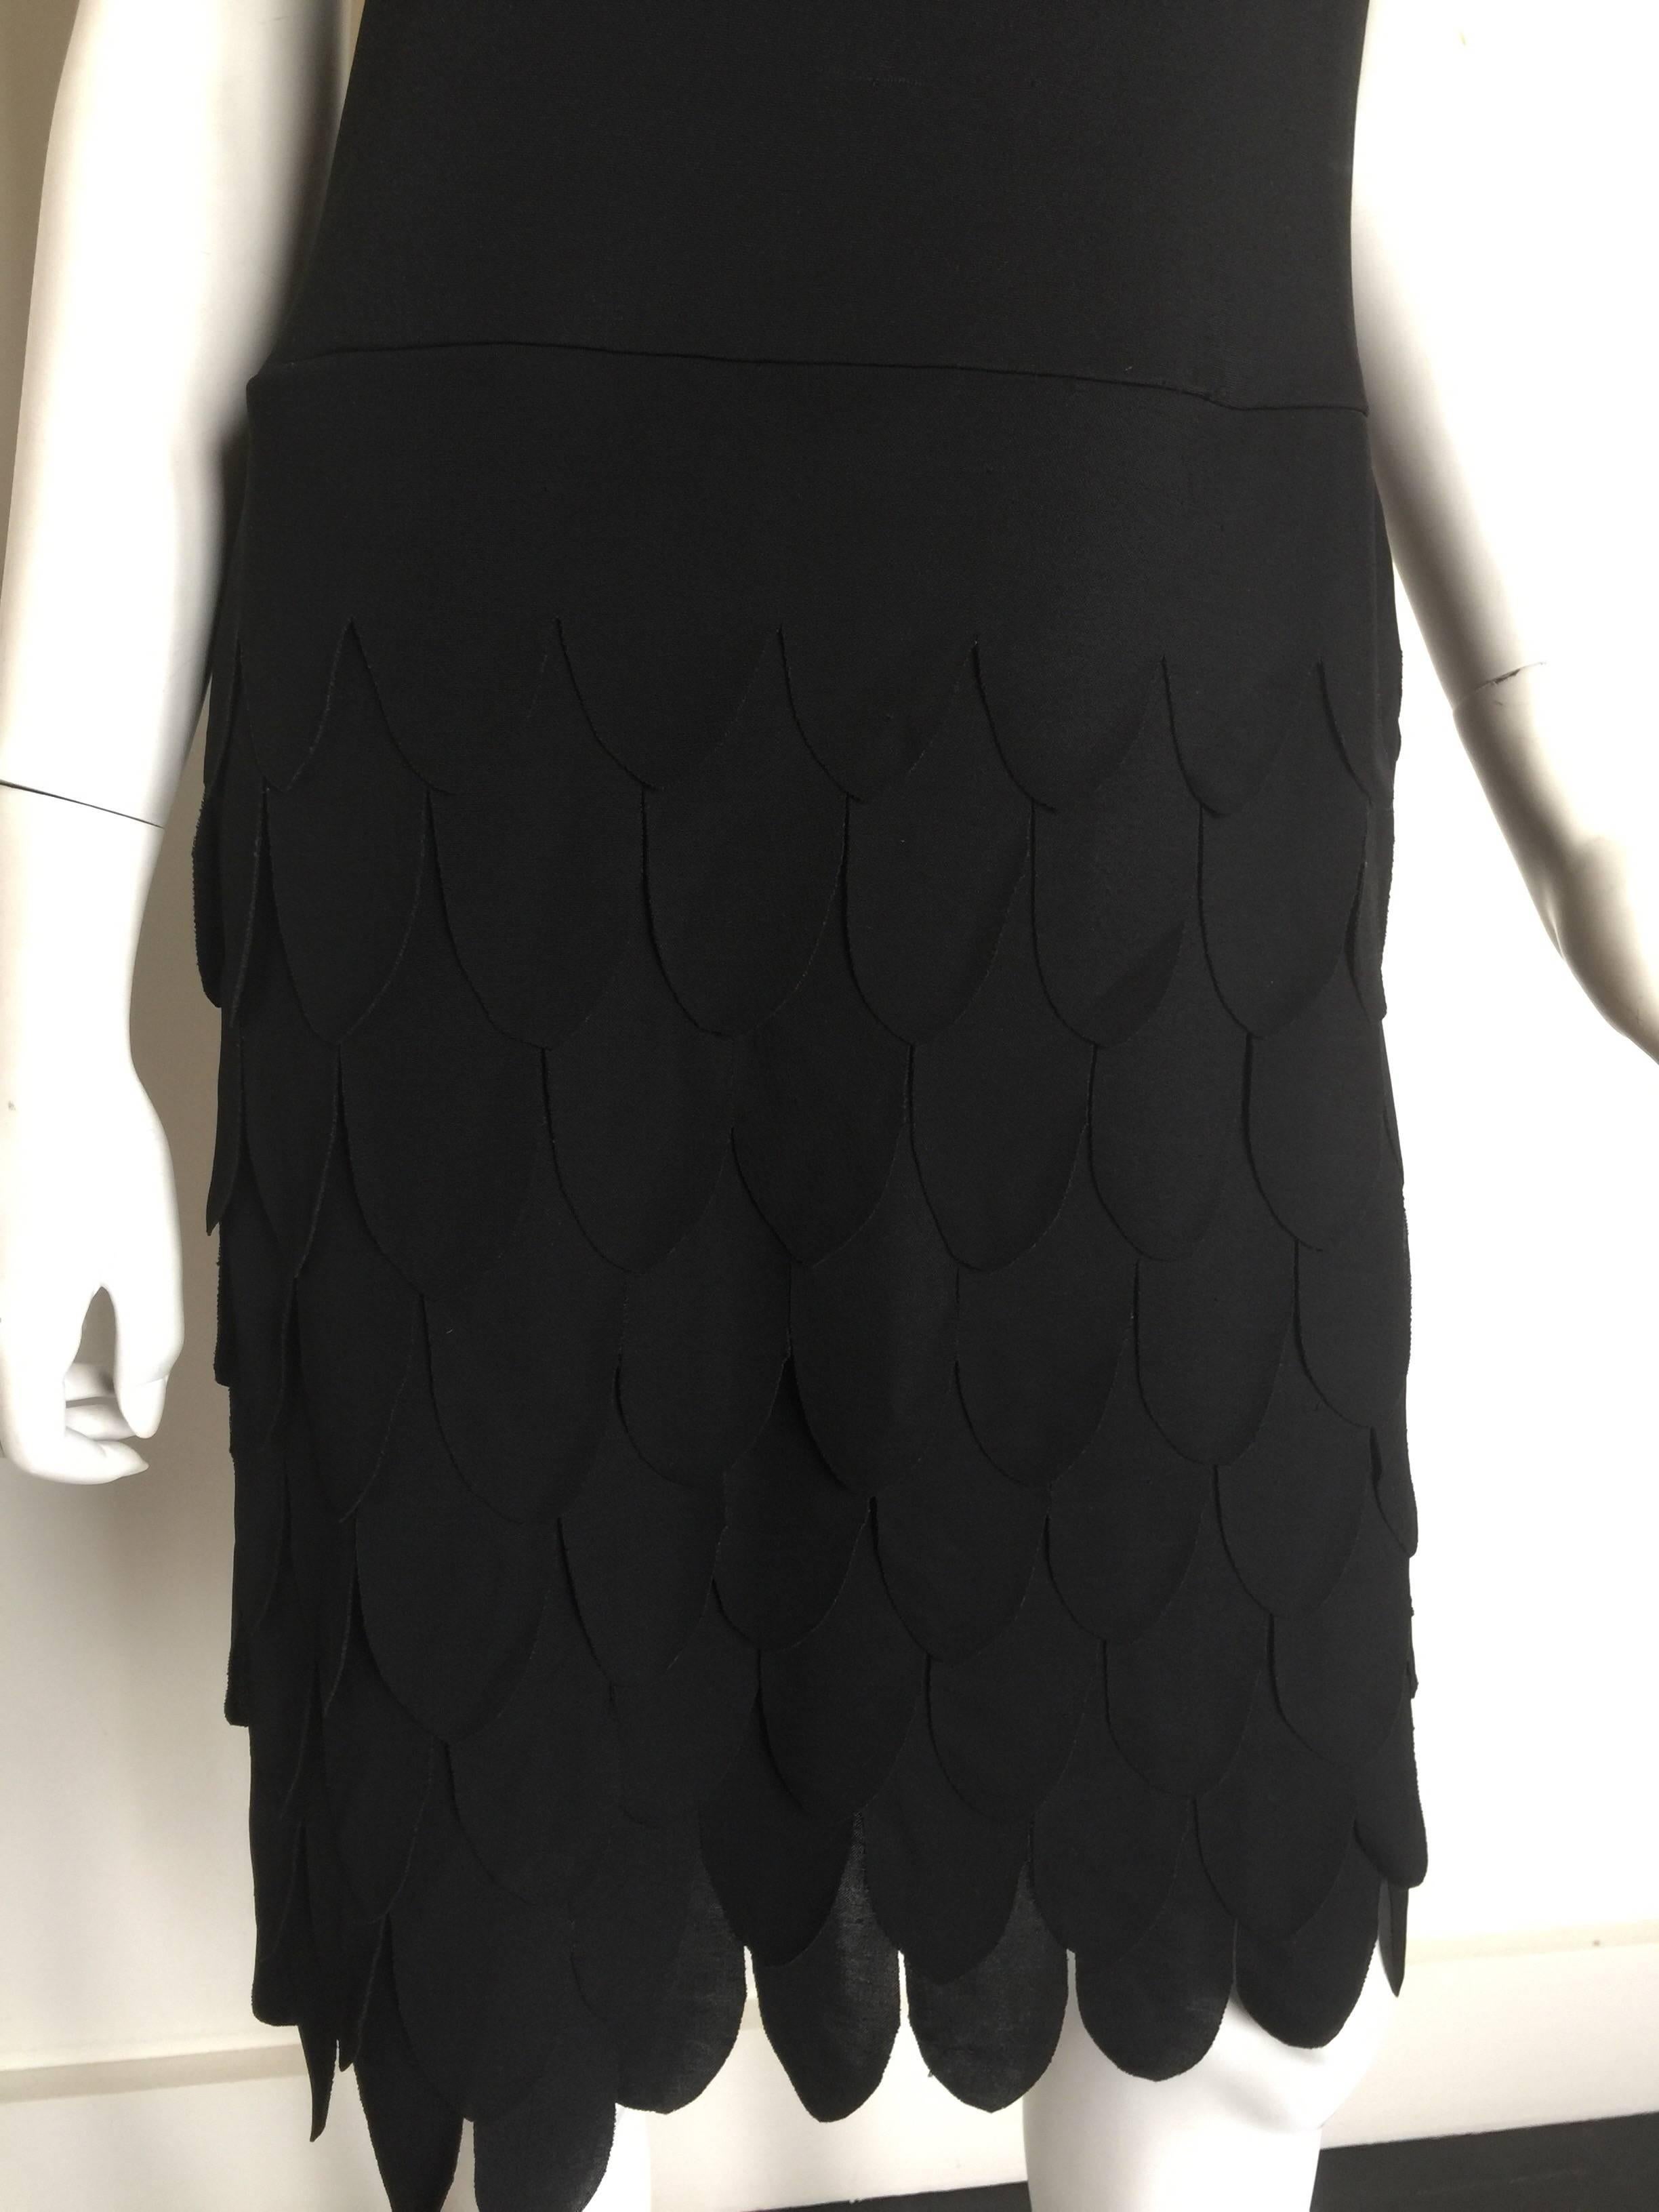 Lillie Rubin Black Sleeveless Ruffled Dress In Good Condition For Sale In New York, NY